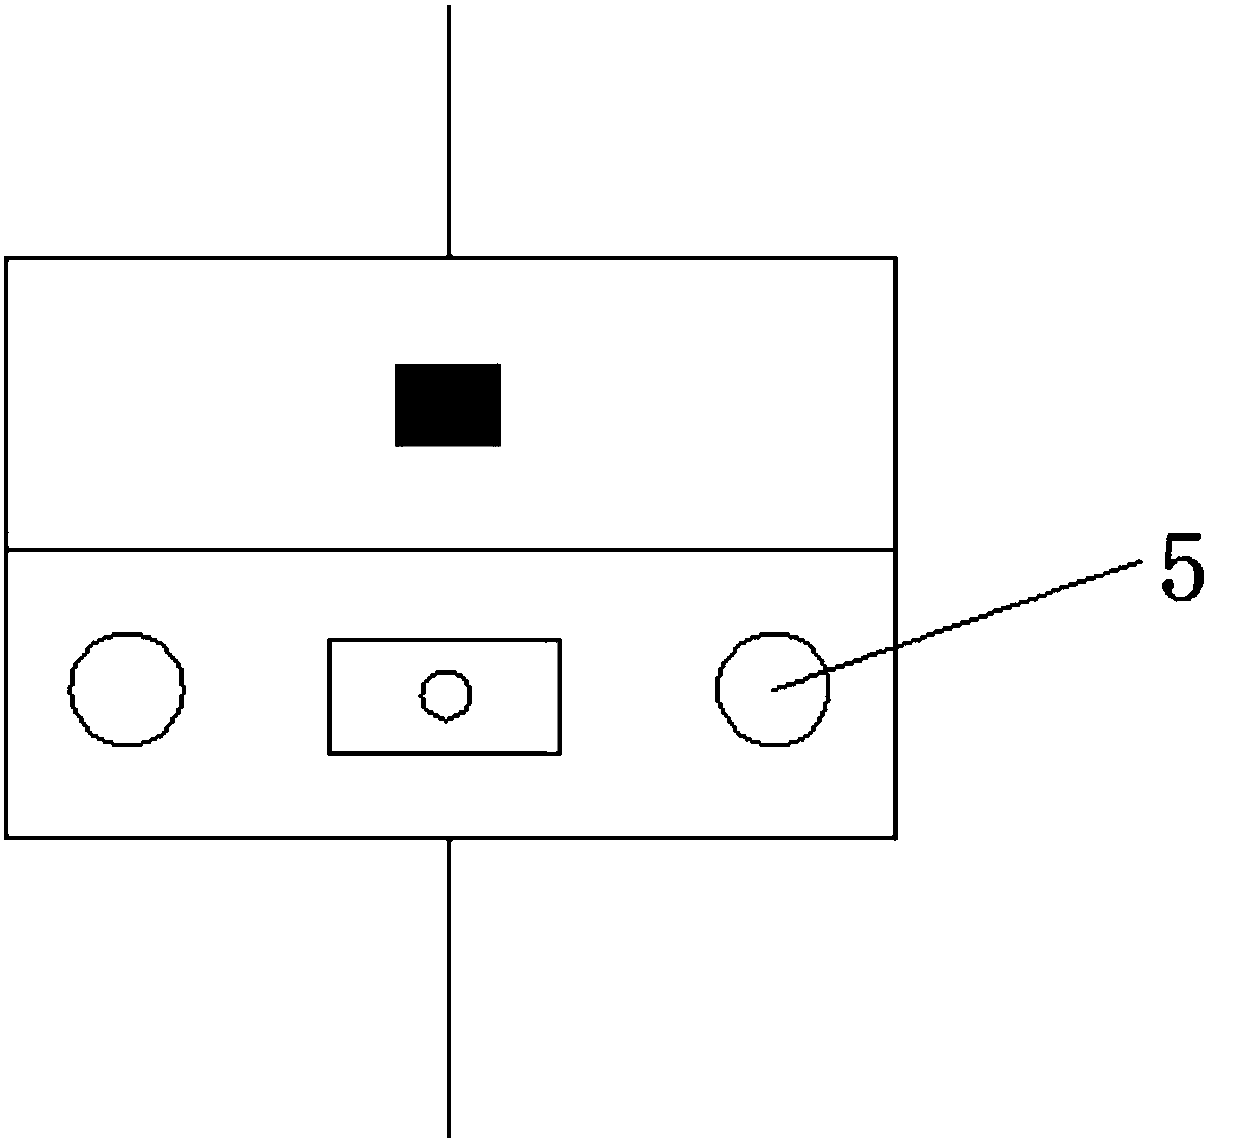 Light-operated switch for warm air blower